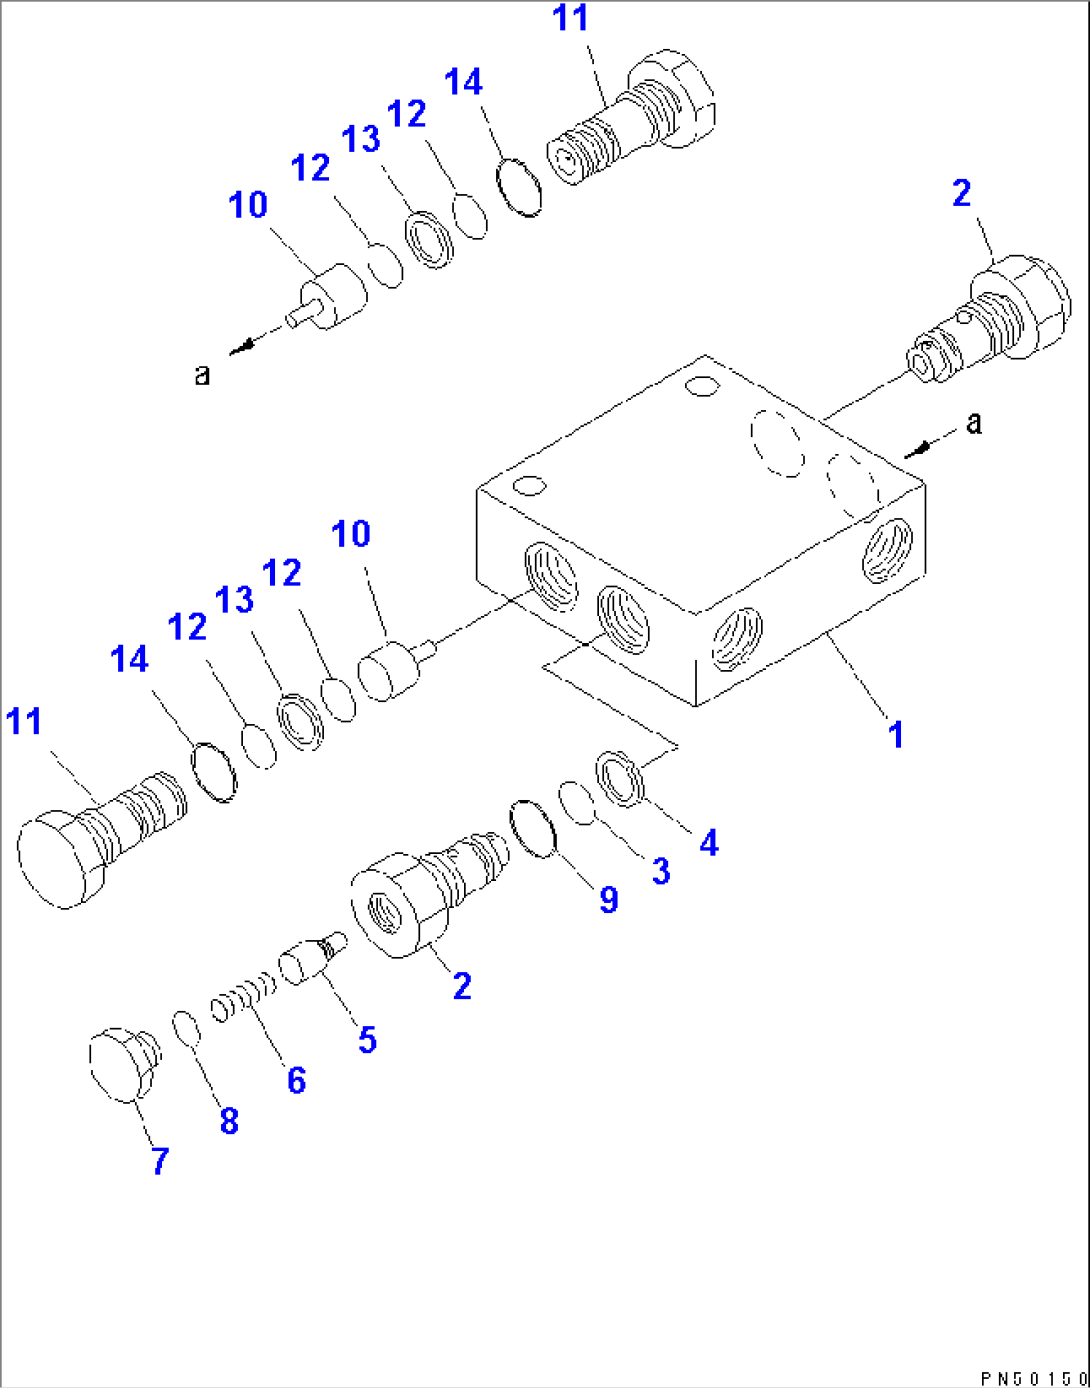 PILOT CHECK VALVE (FOR ARTICULATE OR ANGLING PLOW ANGLE)